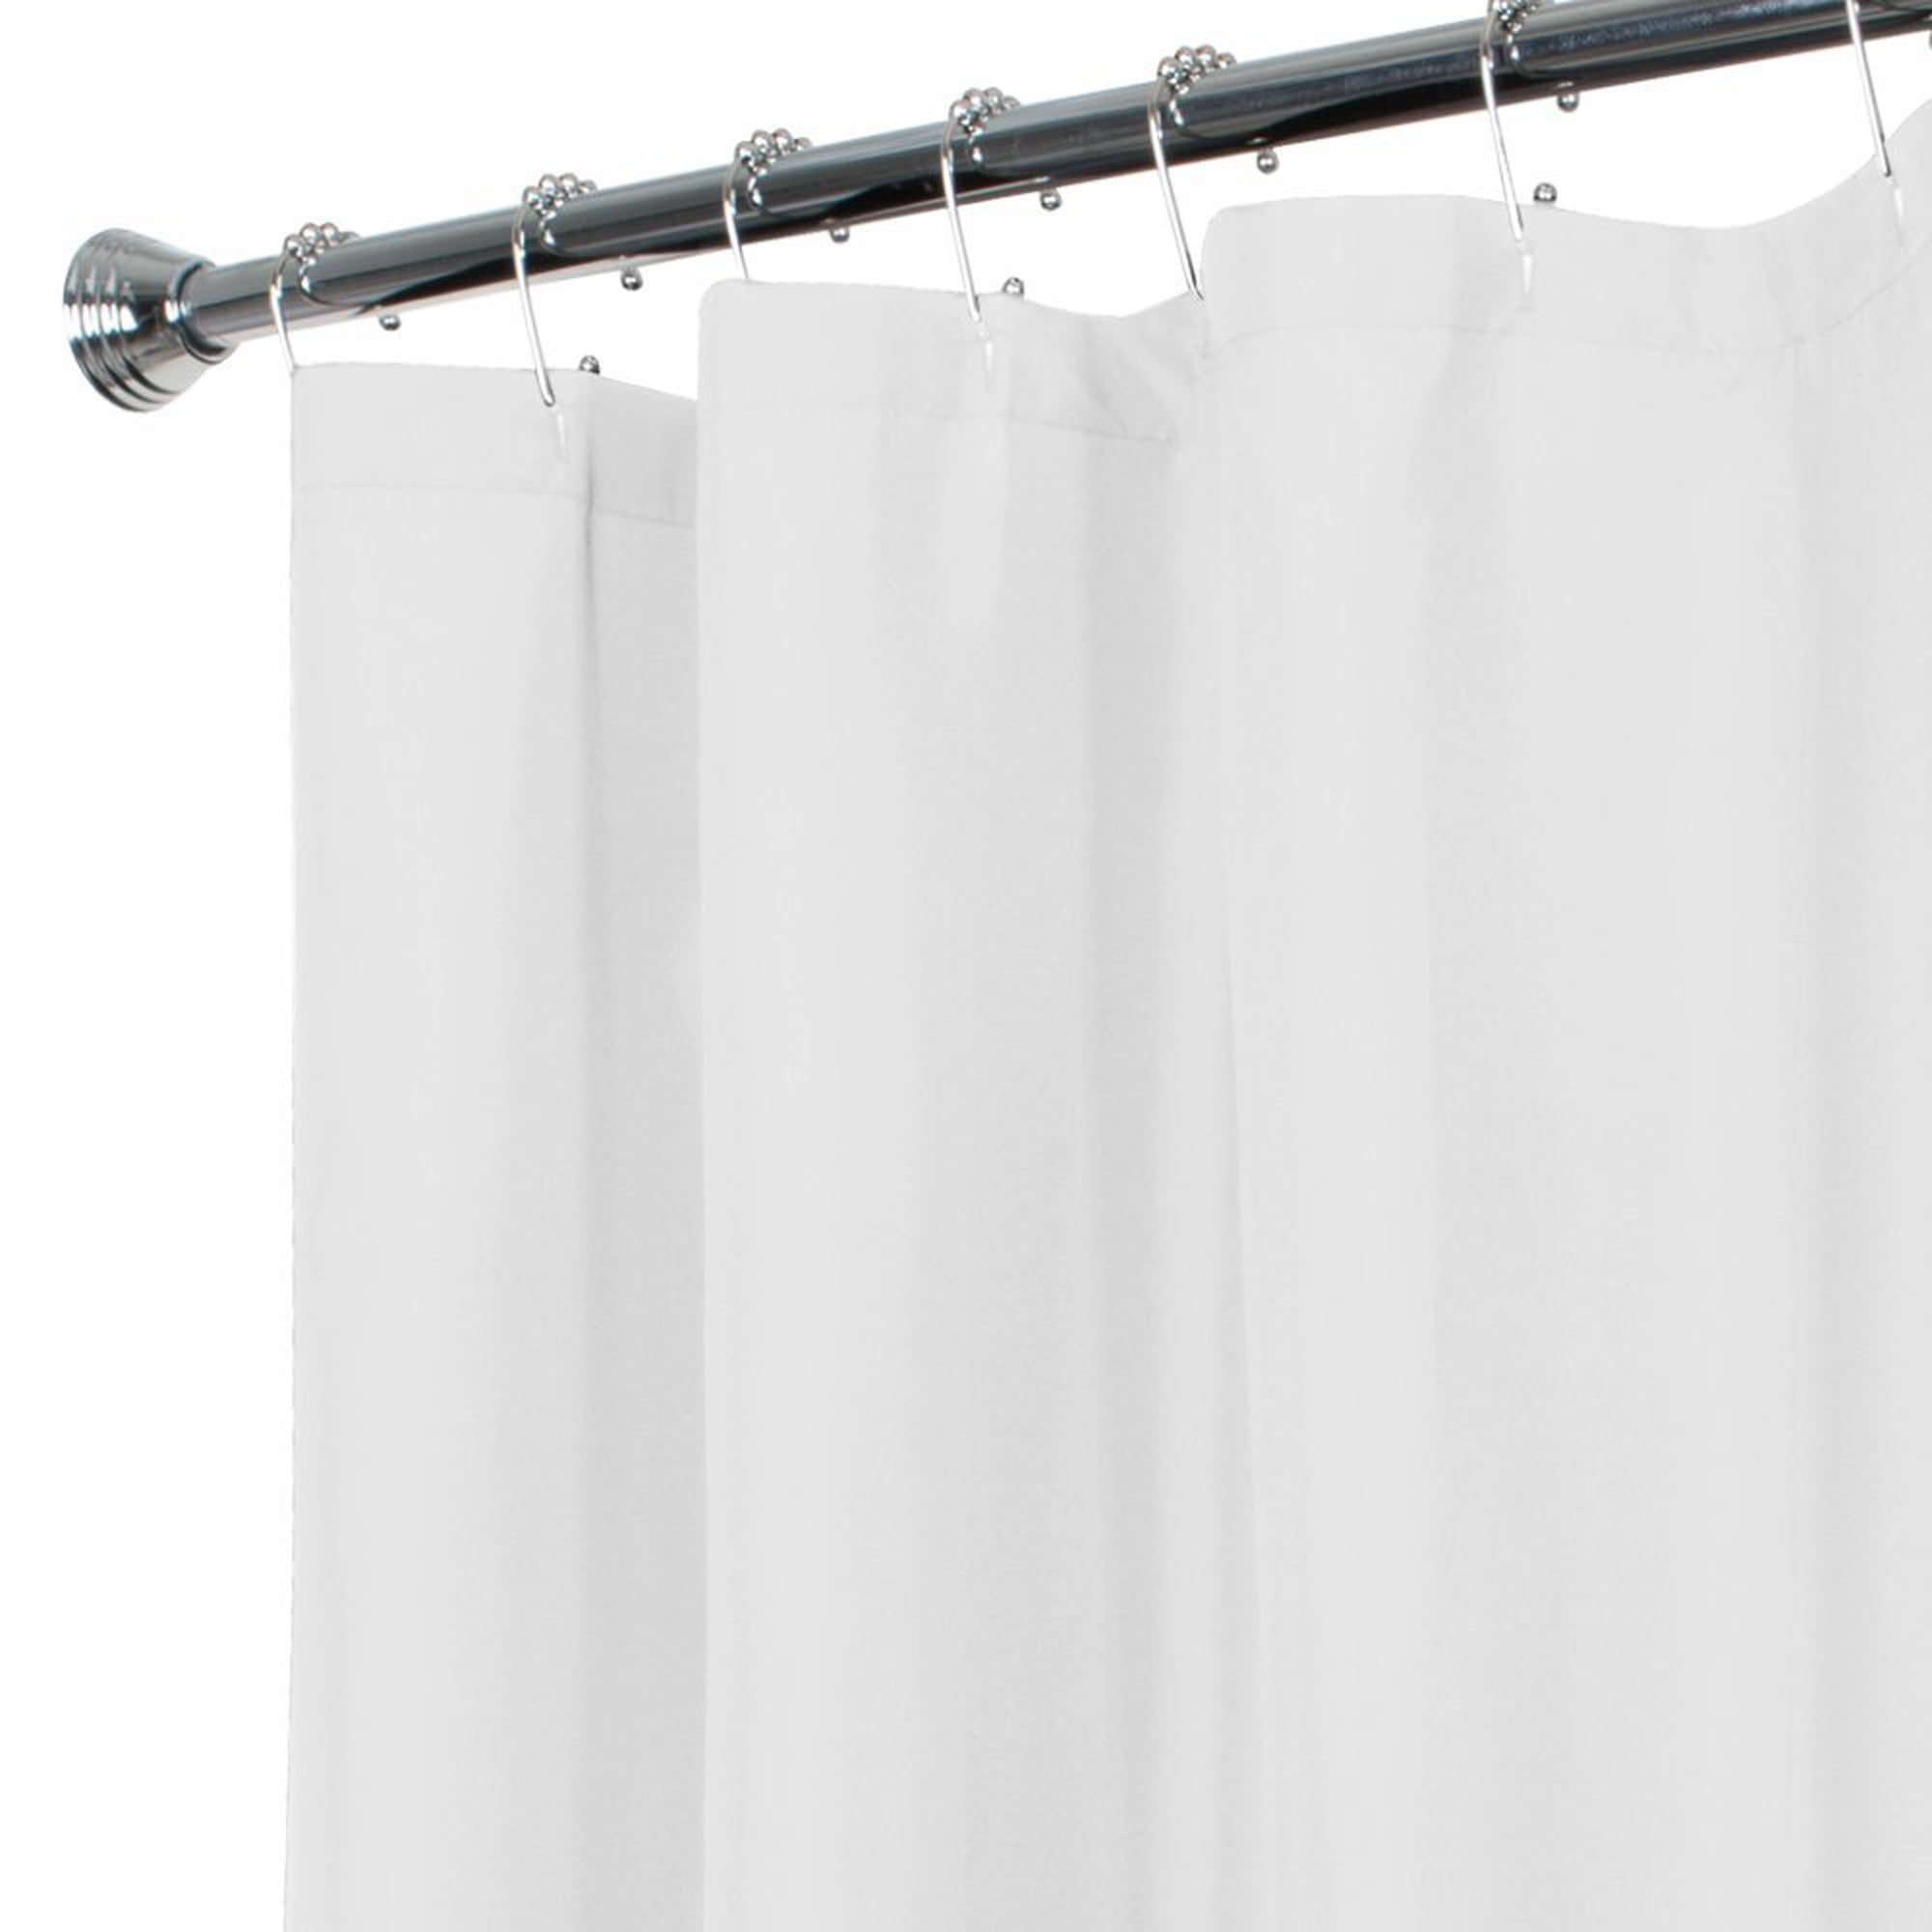 Wa Water-Repellent Bathroom Fabric Details about   Rellosatul Polyester Shower-Curtain 